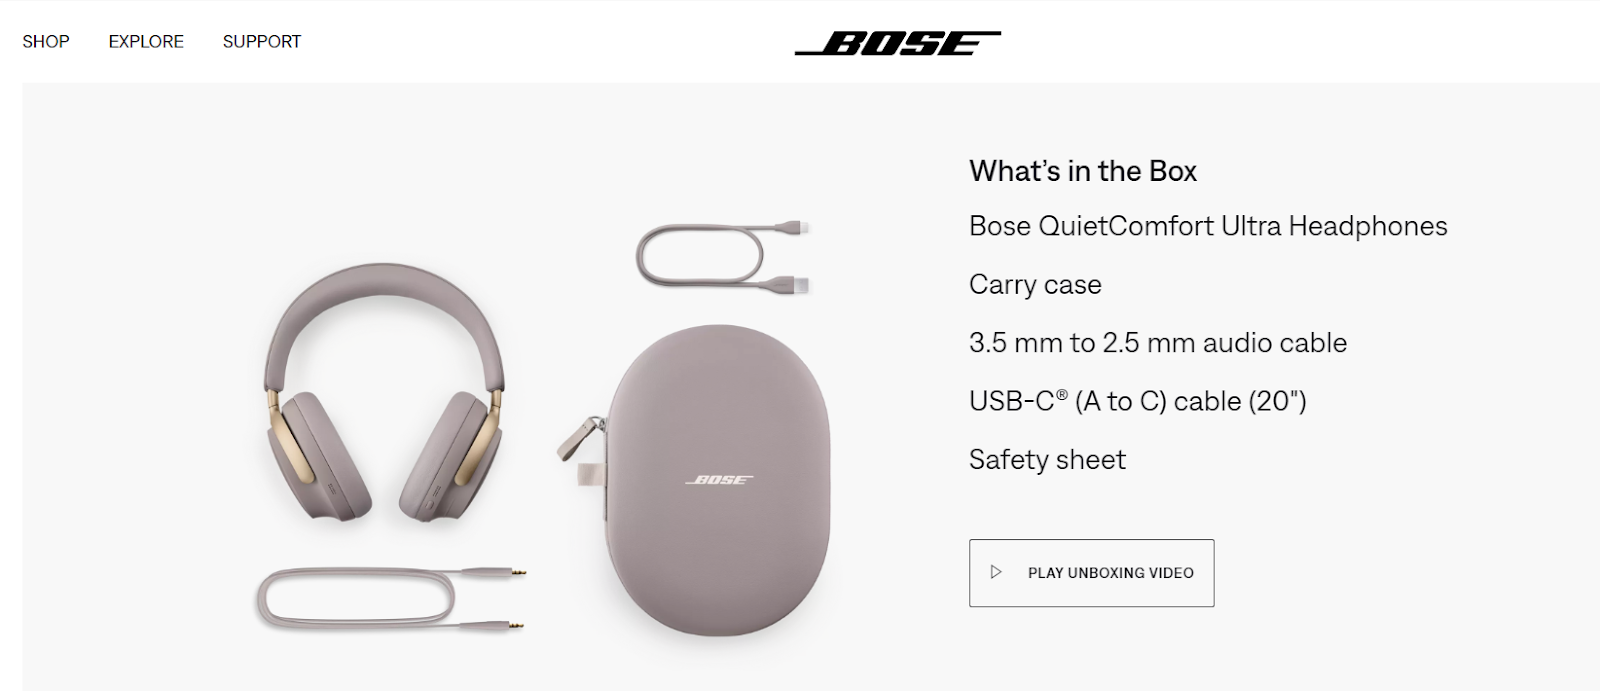 Detailed and Scannable Product Descriptions - BOSE - Example